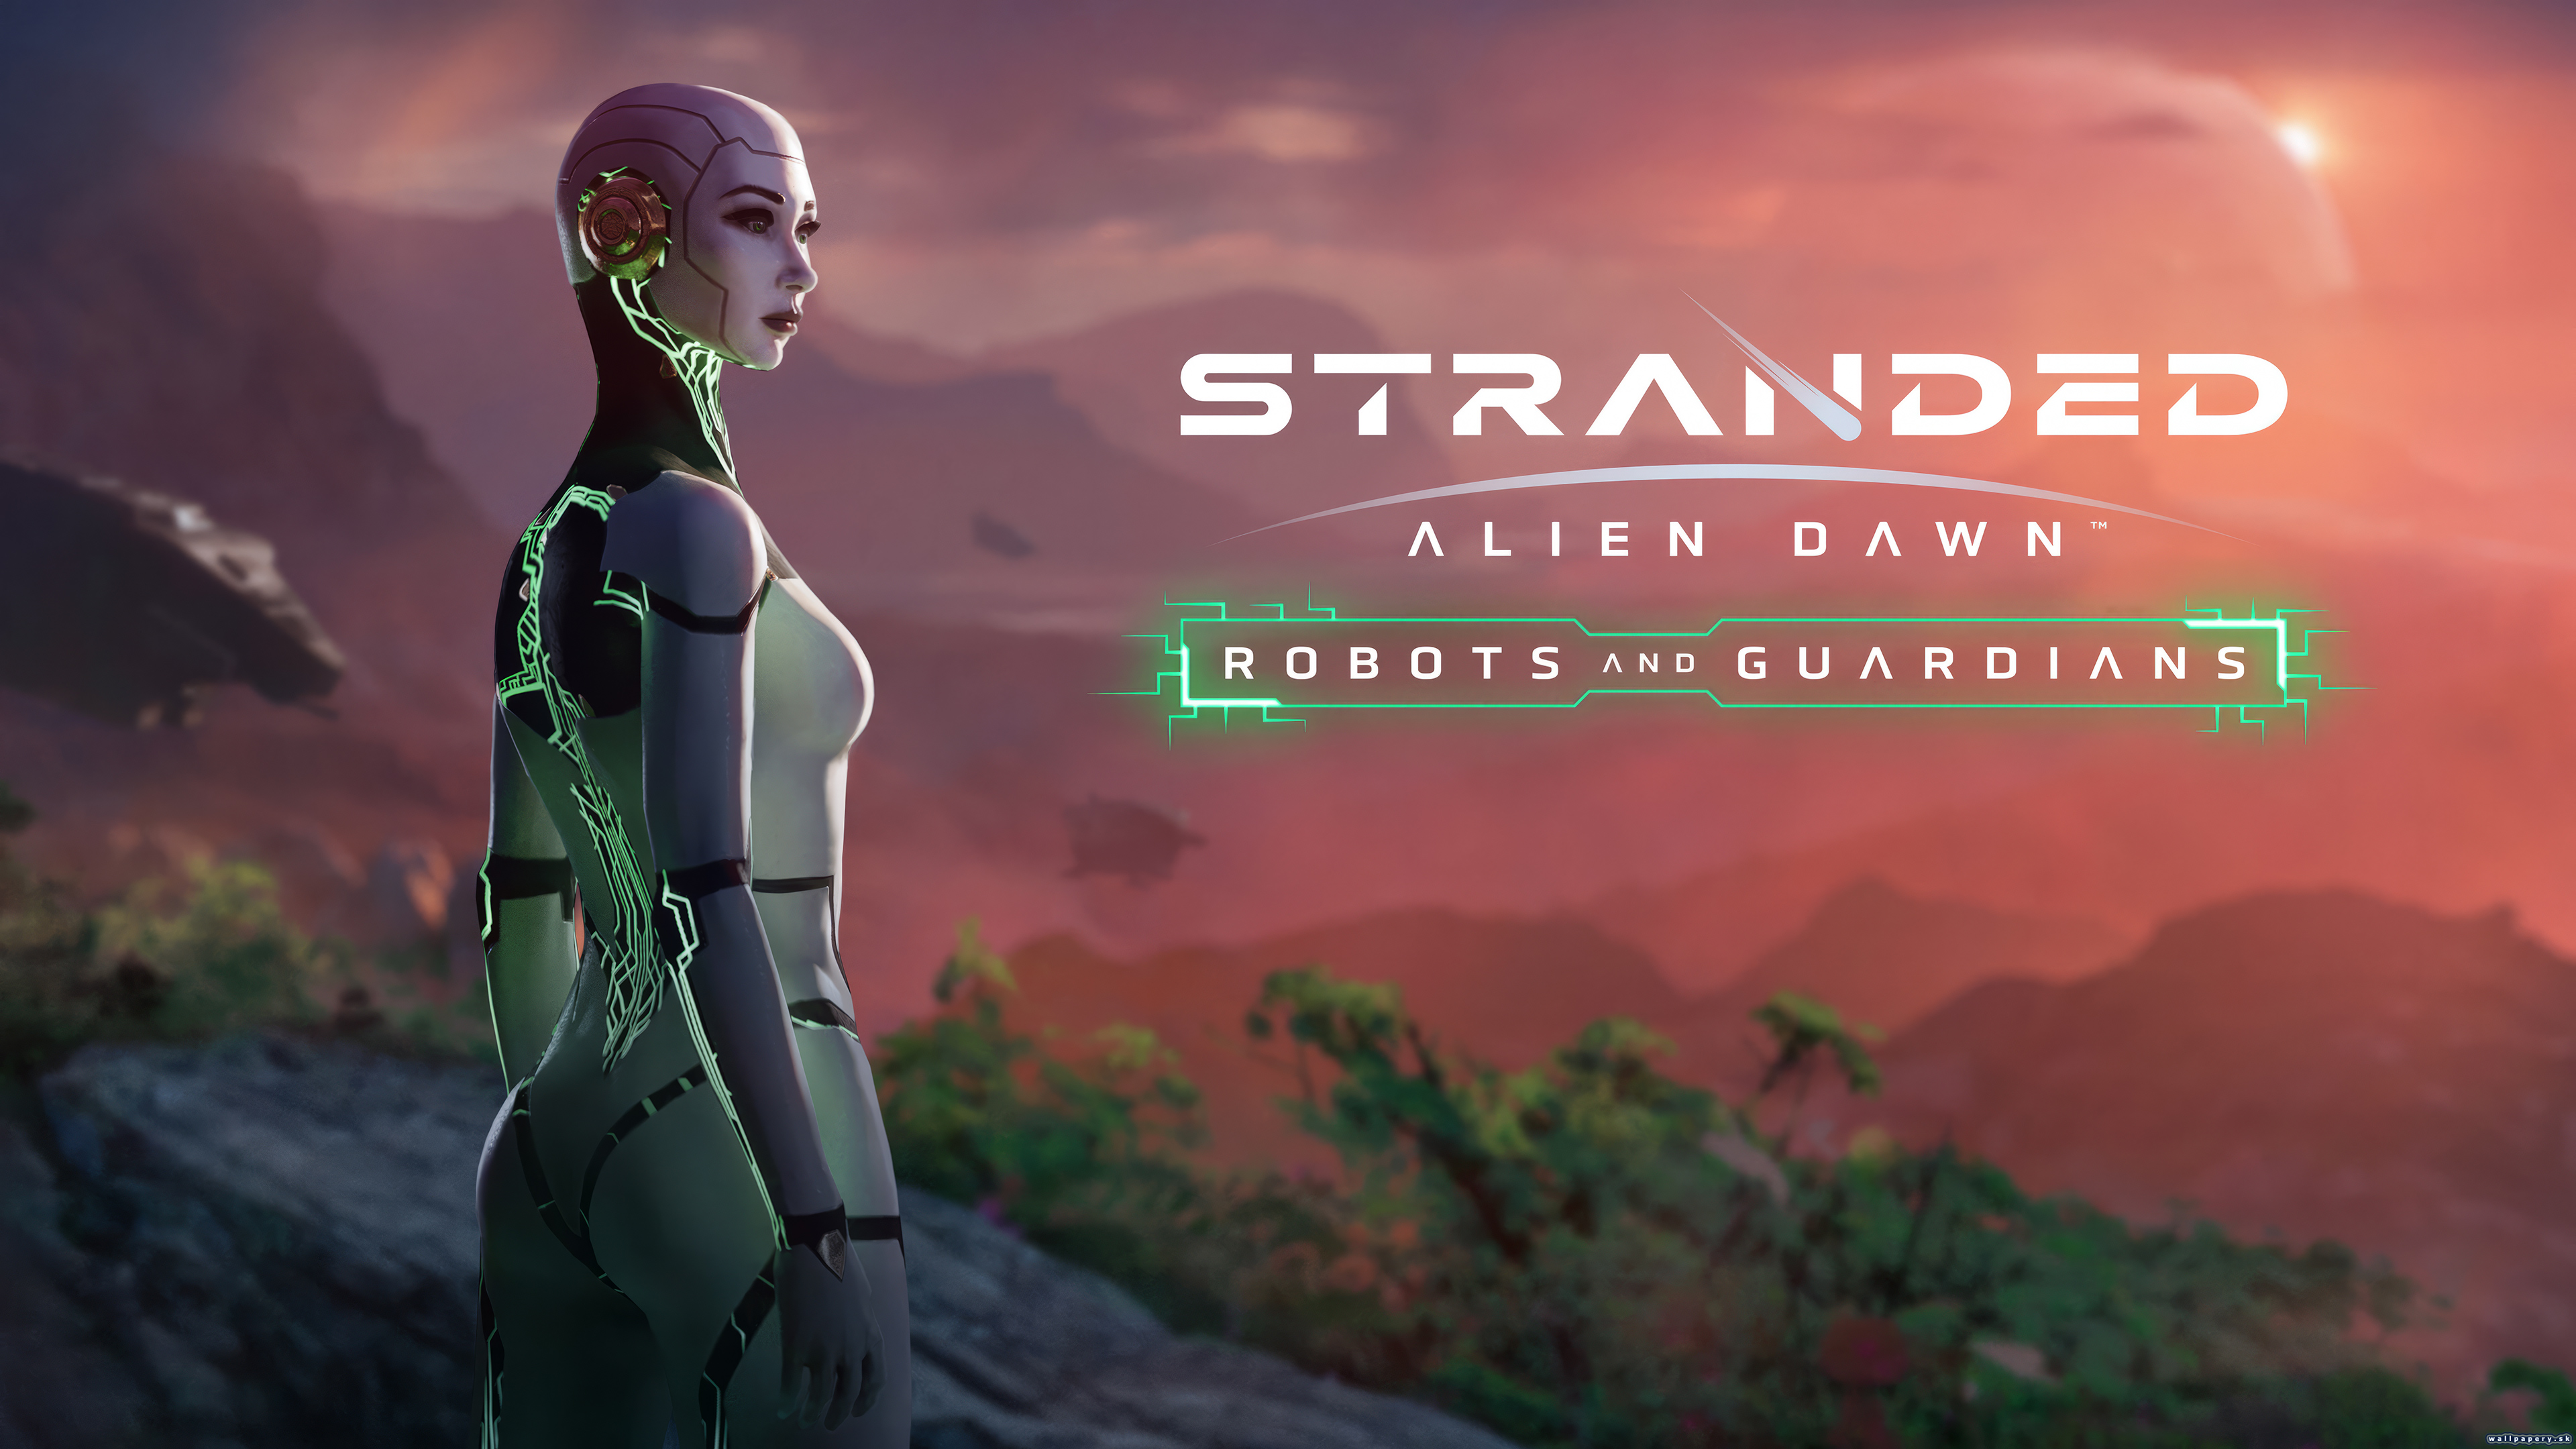 Stranded: Alien Dawn - Robots and Guardians - wallpaper 1